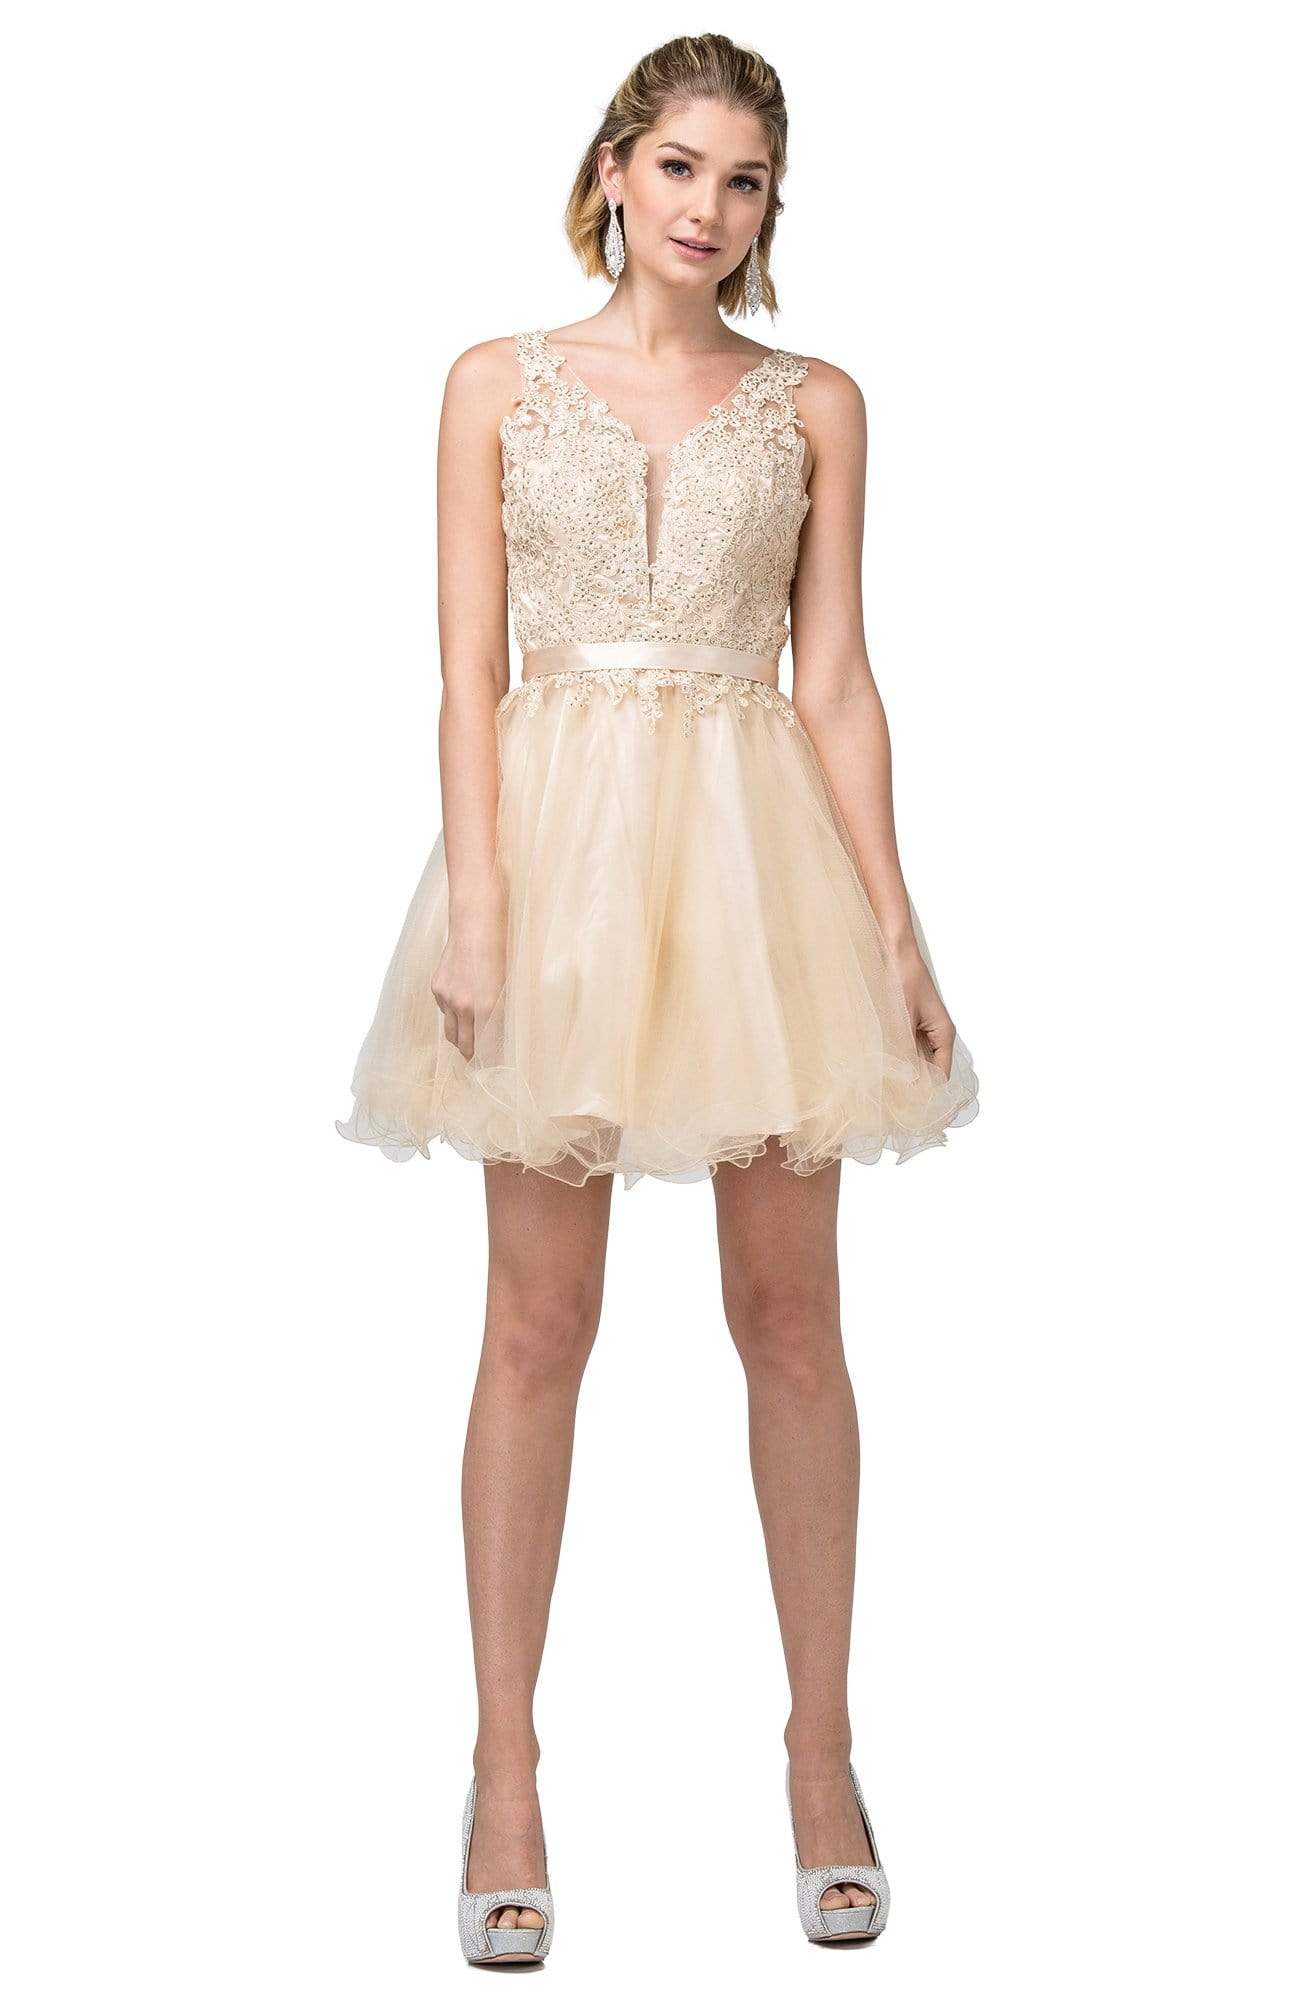 Image of Dancing Queen - 3150 Appliqued Lace Bodice Tulle Dress